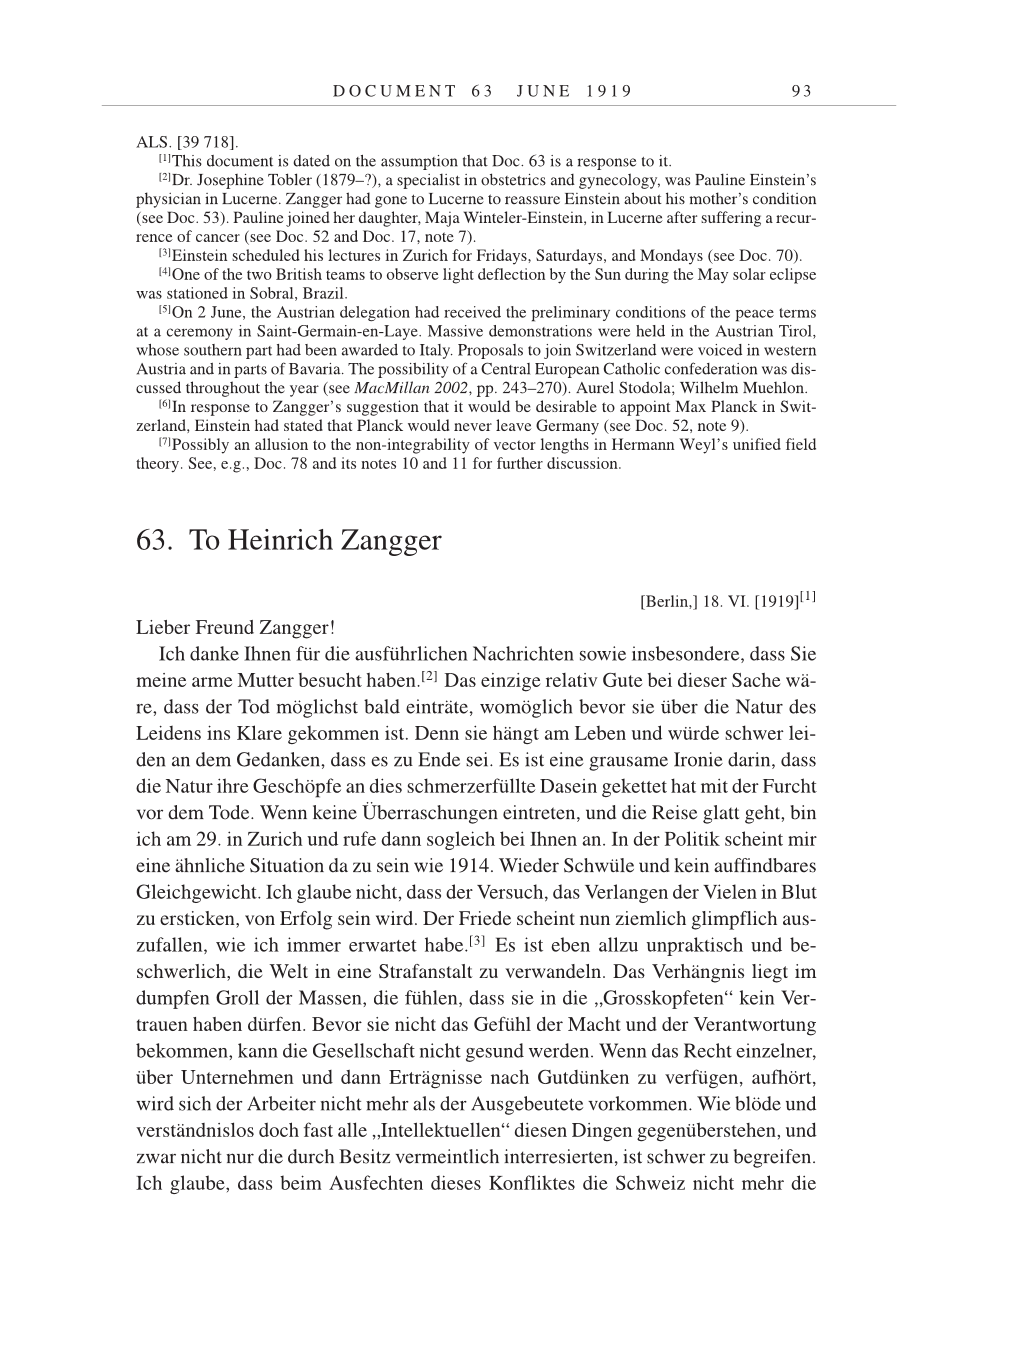 Volume 9: The Berlin Years: Correspondence January 1919-April 1920 page 93